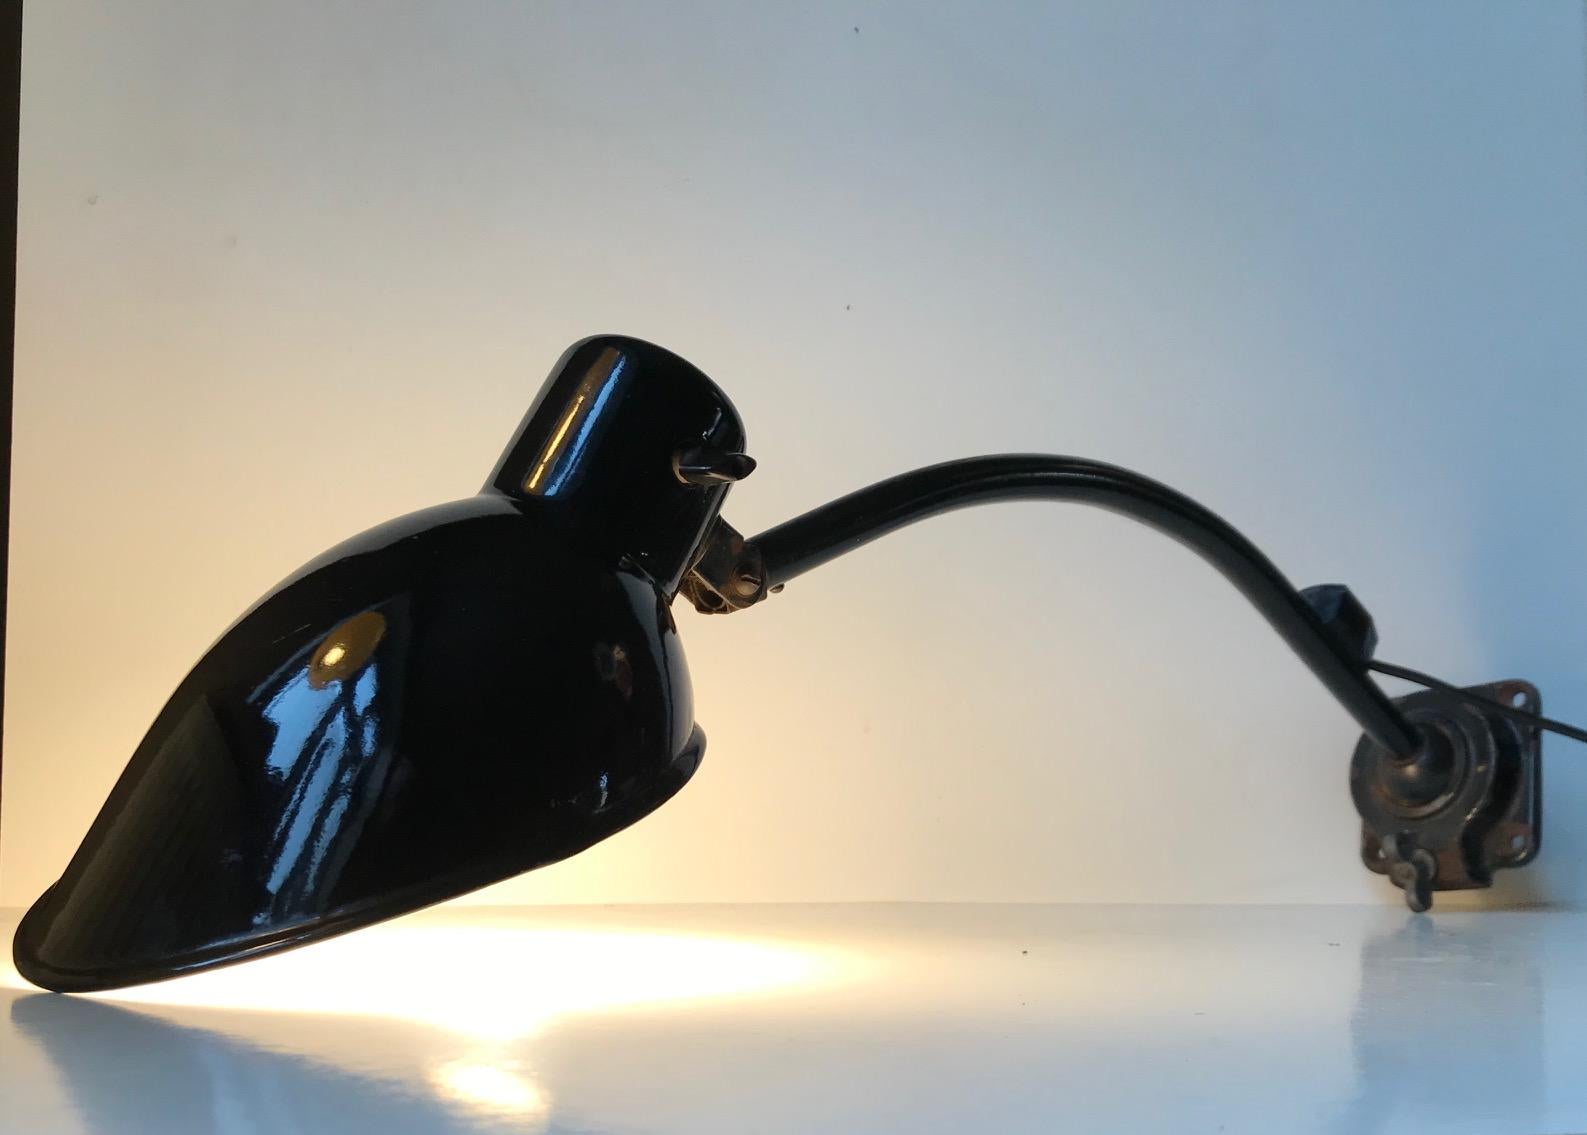 This wall or desk lamp was designed by Bauhaus Icon Marianne Brandt. It was manufactured by German Kandem in the 1930s. The adjustable arm is made from black lacquered steel and the shade is enameled Steel. It has a large rotating ball joint at the